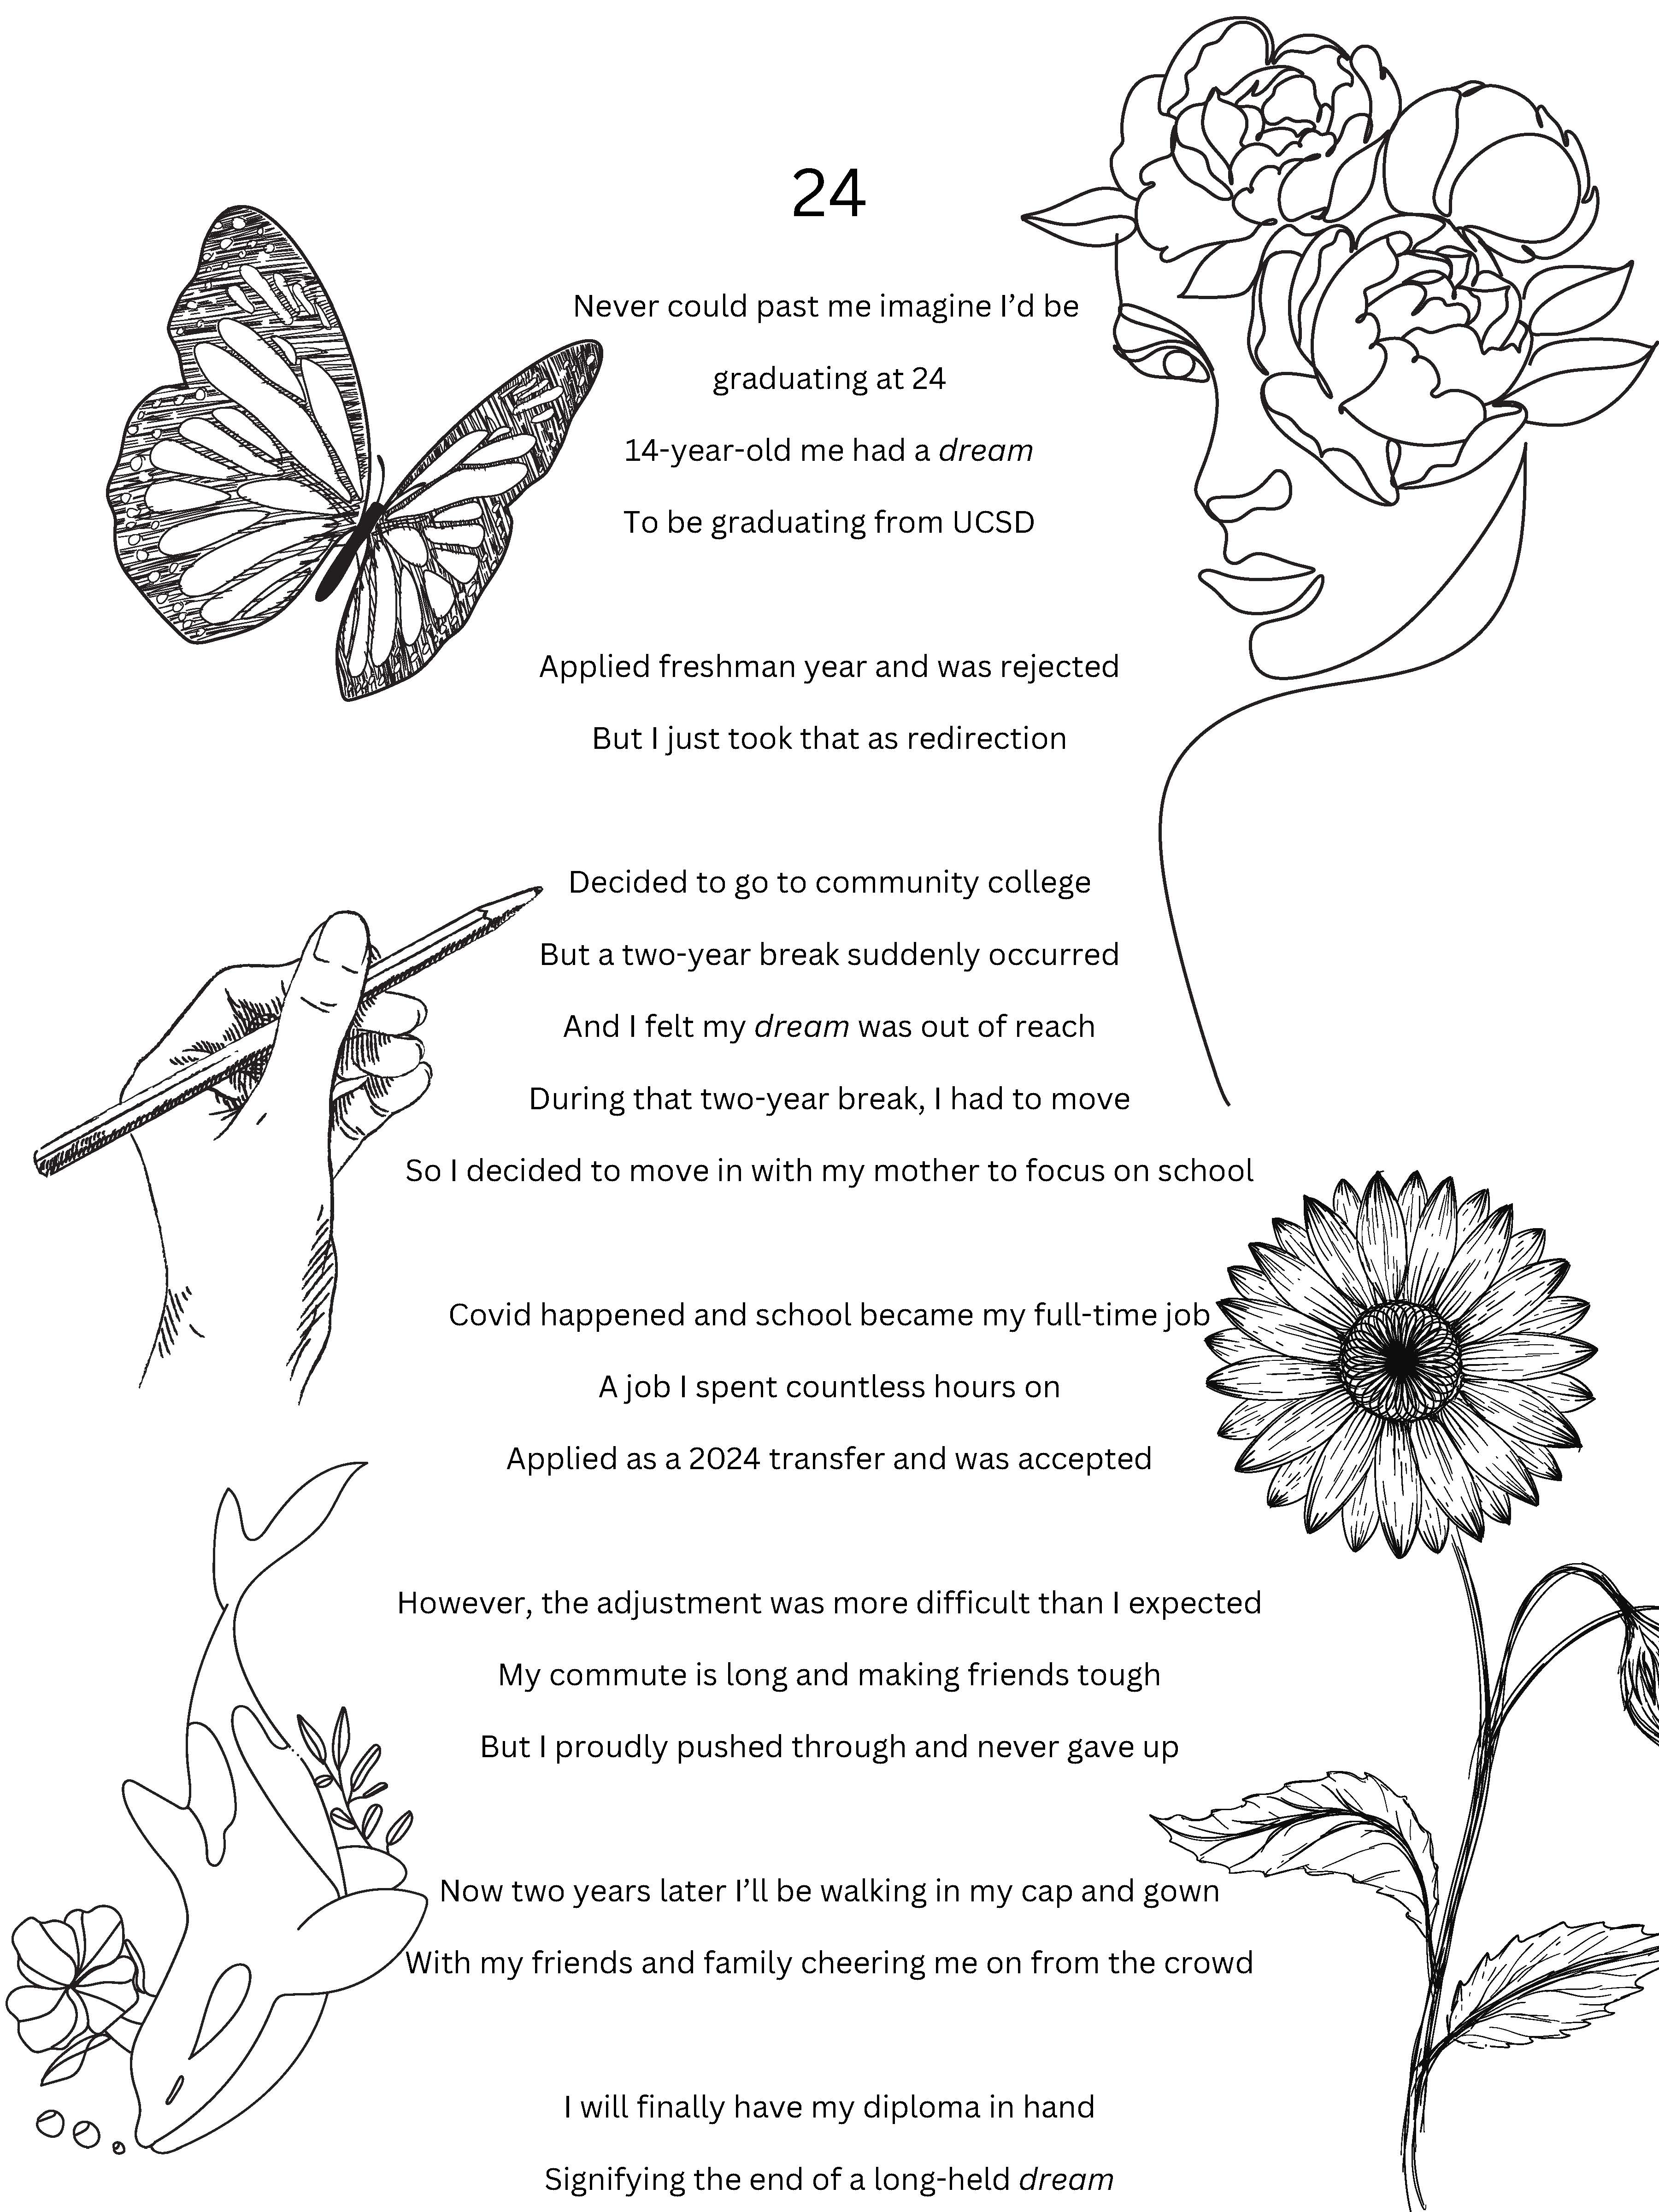 the poem written below surrounded by black outlines of a hand with pencil, butterfly, woman of flowers, sunflowers, and dolphin